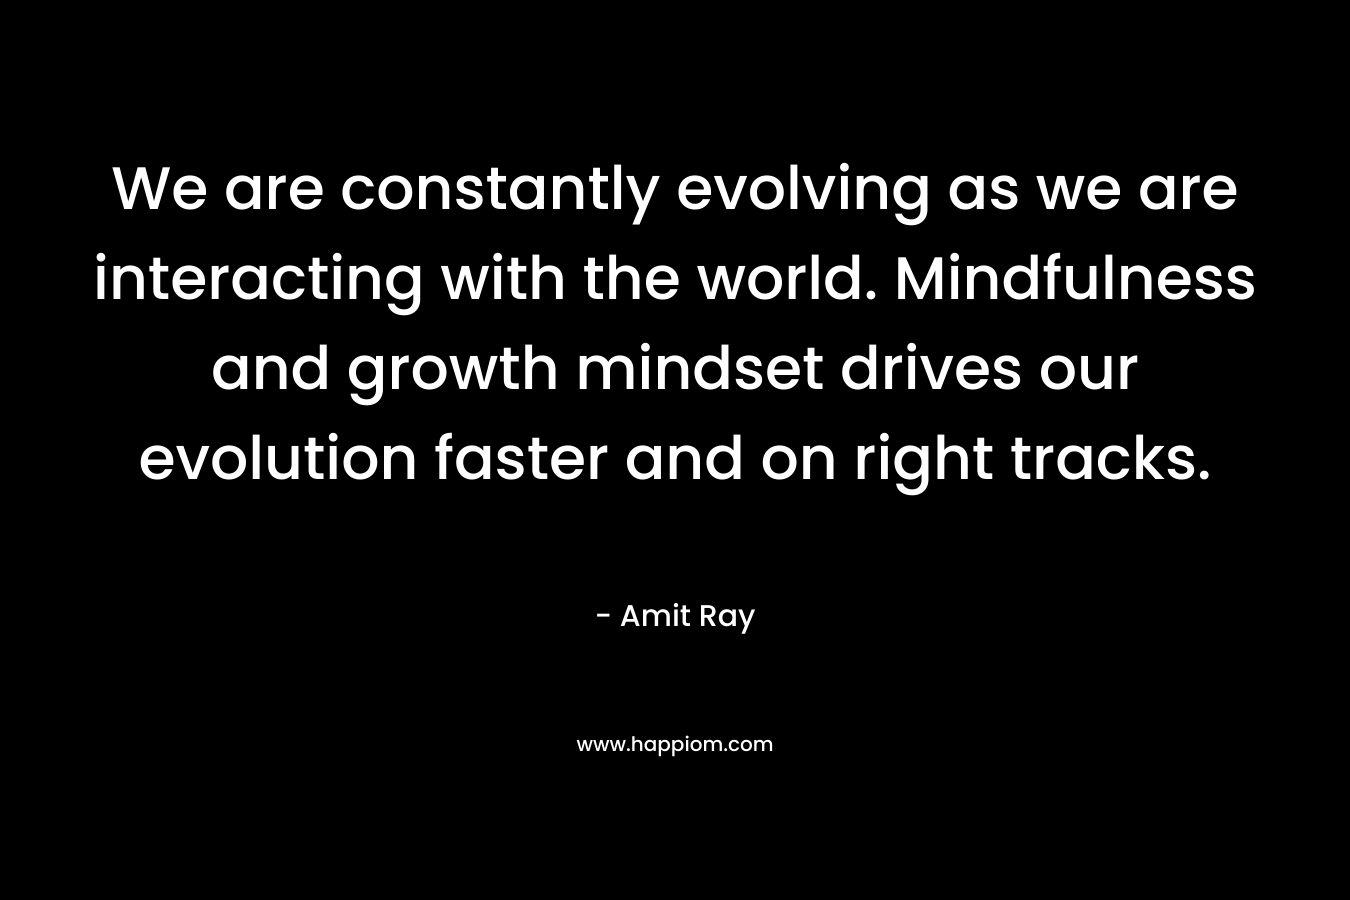 We are constantly evolving as we are interacting with the world. Mindfulness and growth mindset drives our evolution faster and on right tracks.